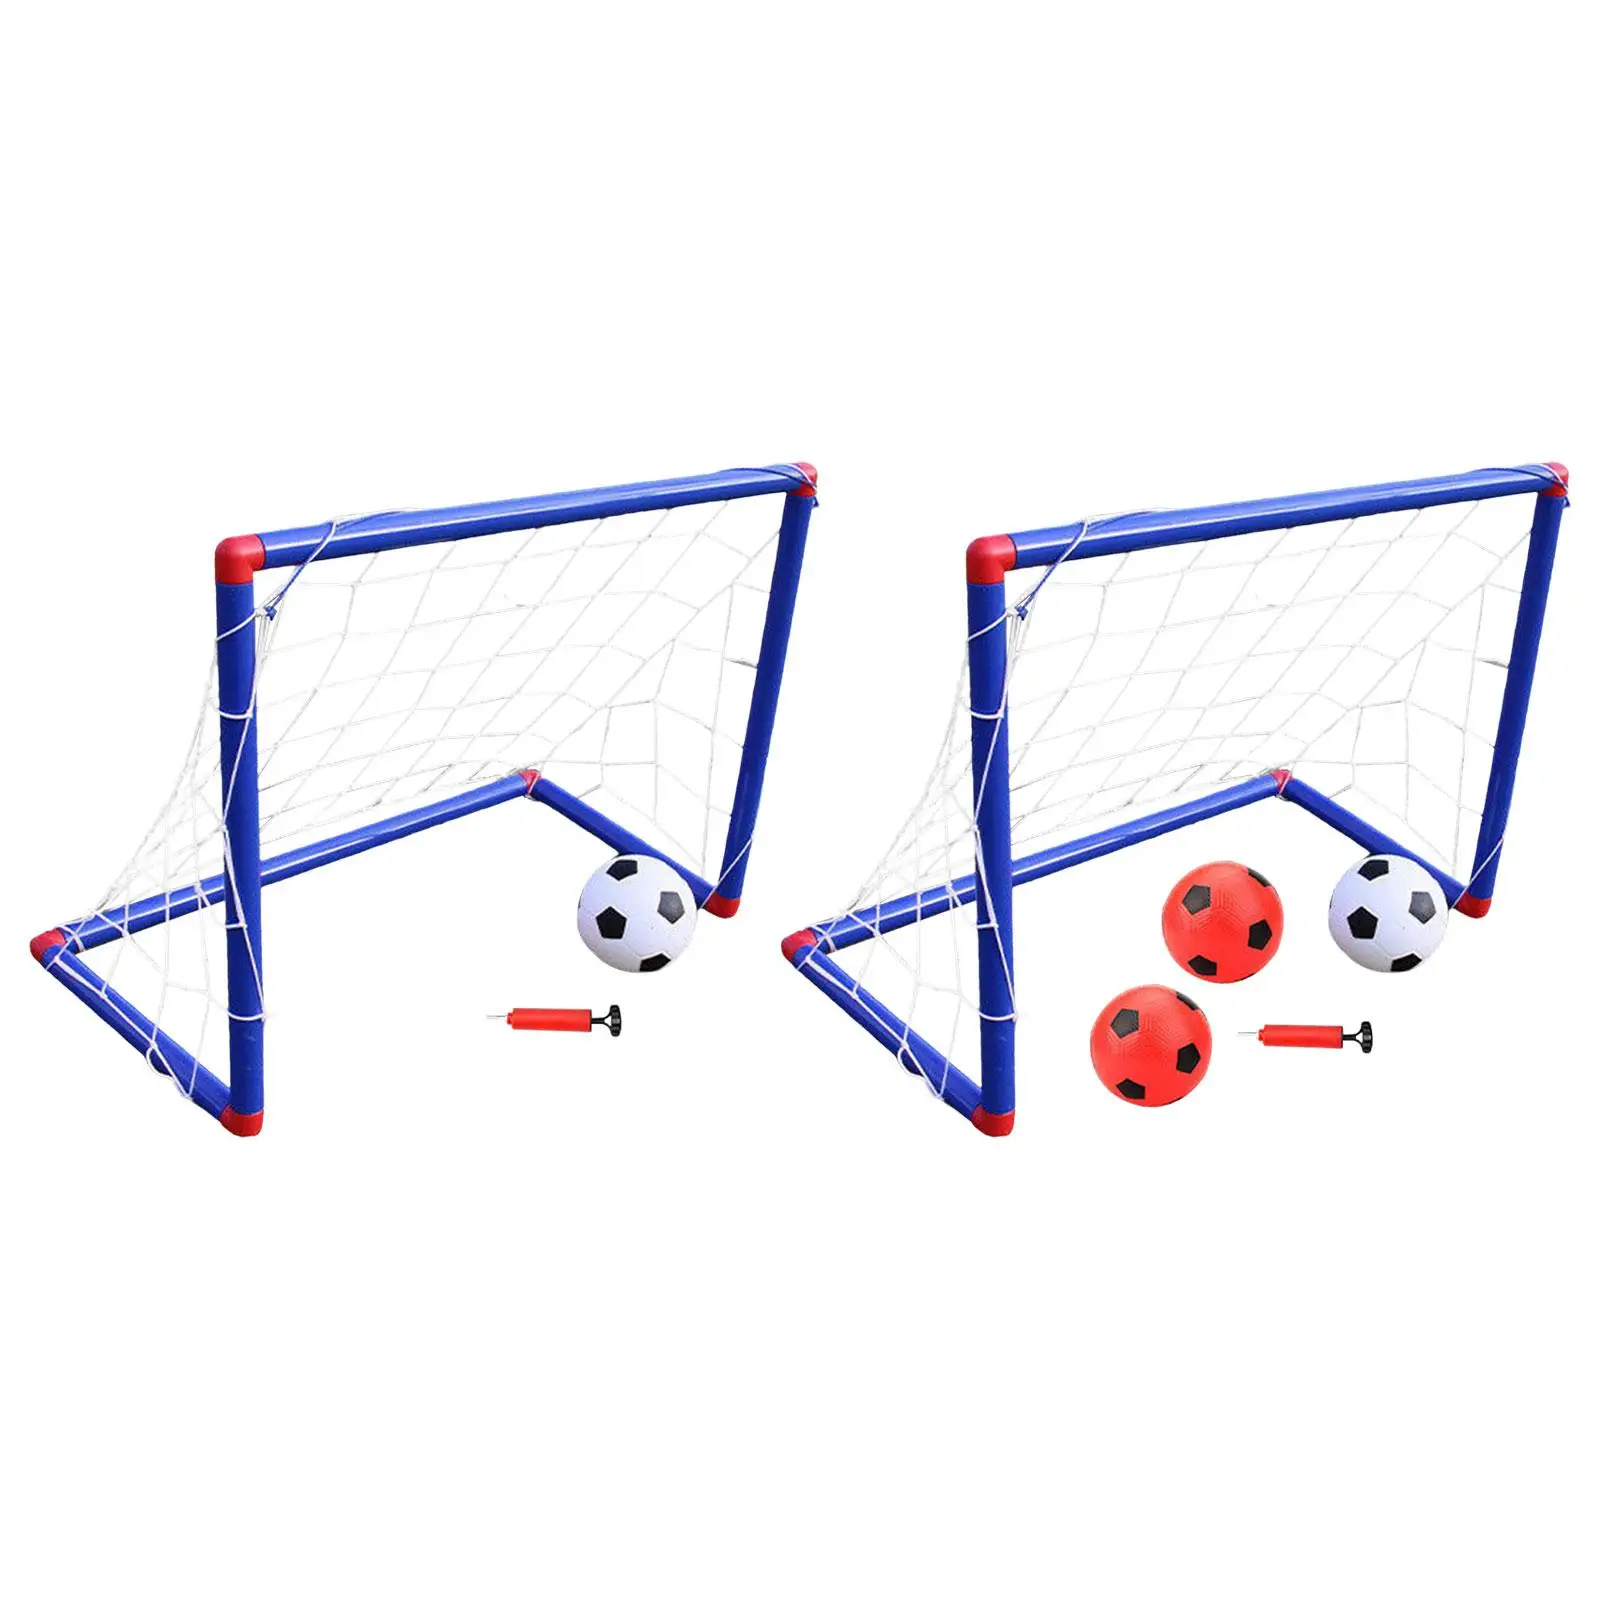 Kids Soccer Goal Sets for Backyard Portable Soccer Post Net and Ball Football Gate for Outdoor Playground Beach Lawn Activities